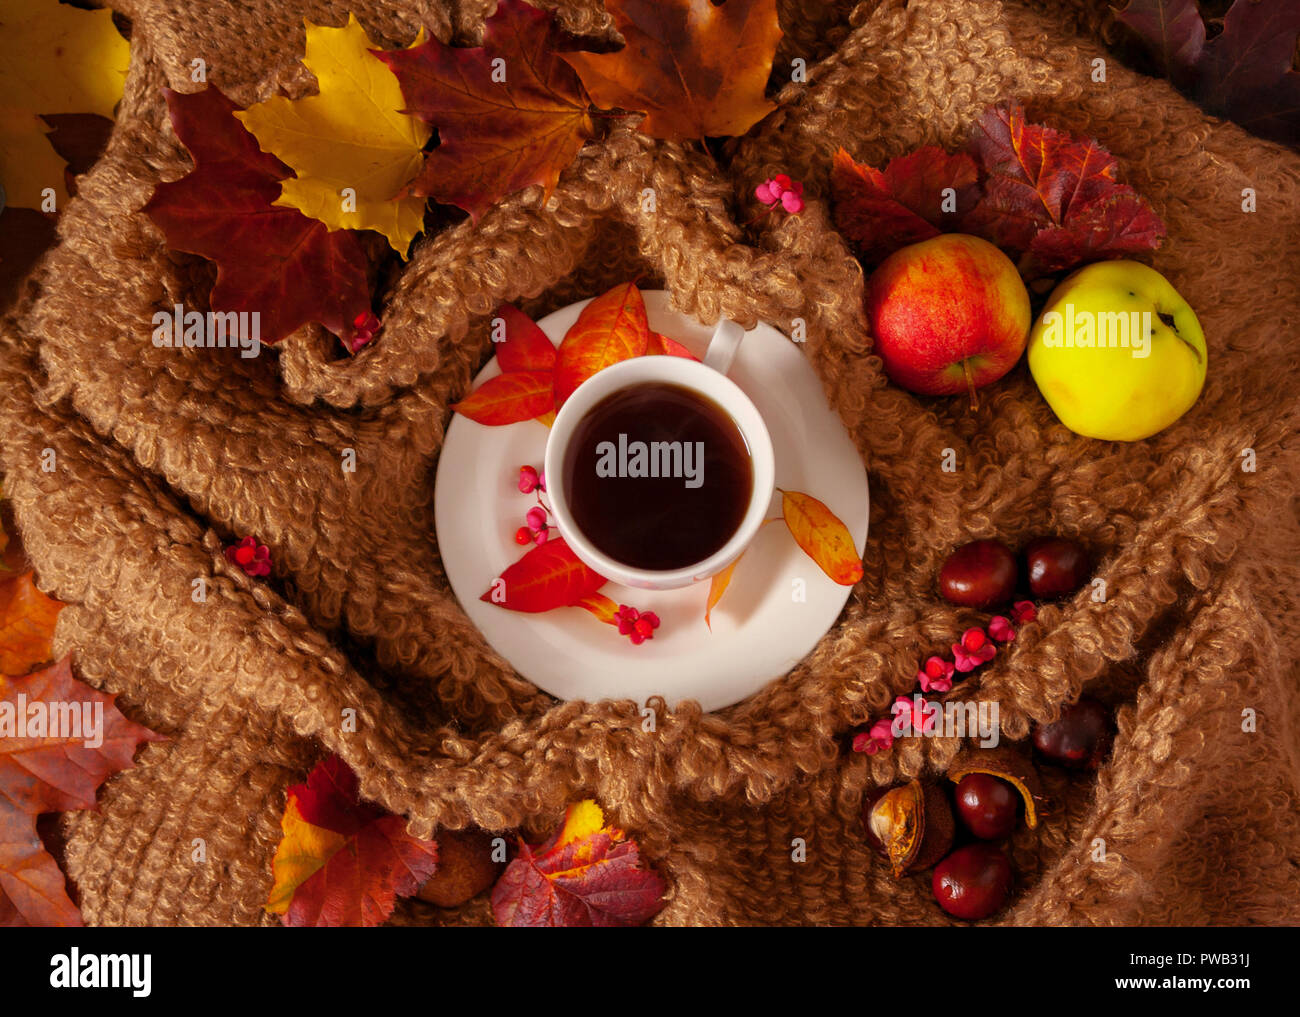 white cup with hot tea, steam, woolen material surrounds a saucer, colorful maple leaves on a cloth, two apples and chestnuts, an autumn look, Stock Photo